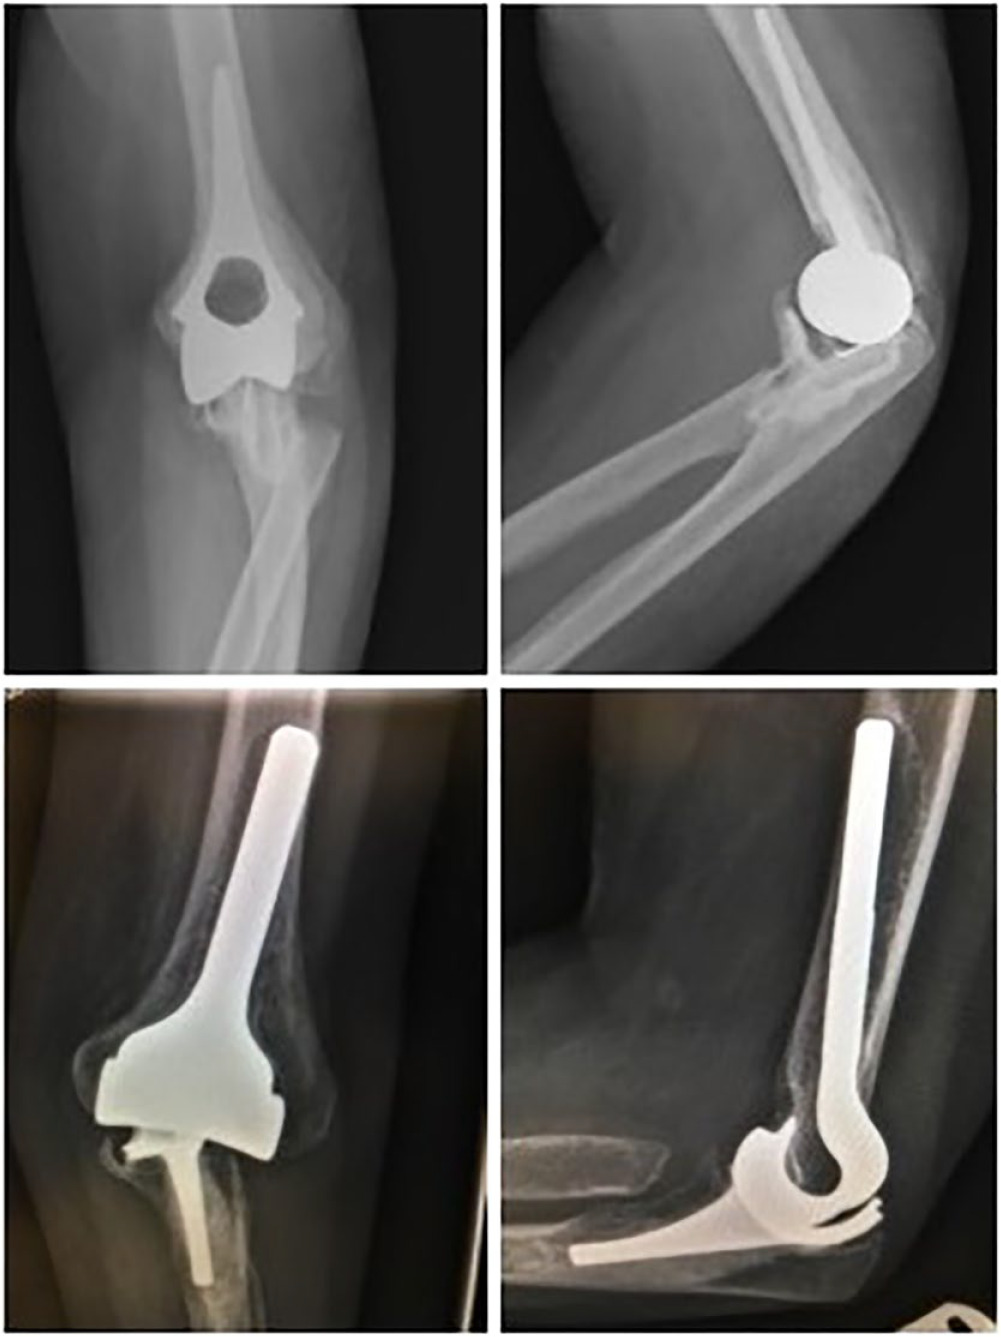 Fig. 4 
            Radiographs presenting two commonly used unlinked prostheses in the past: Souter-Strathclyde (top) and Kudo (bottom).
          